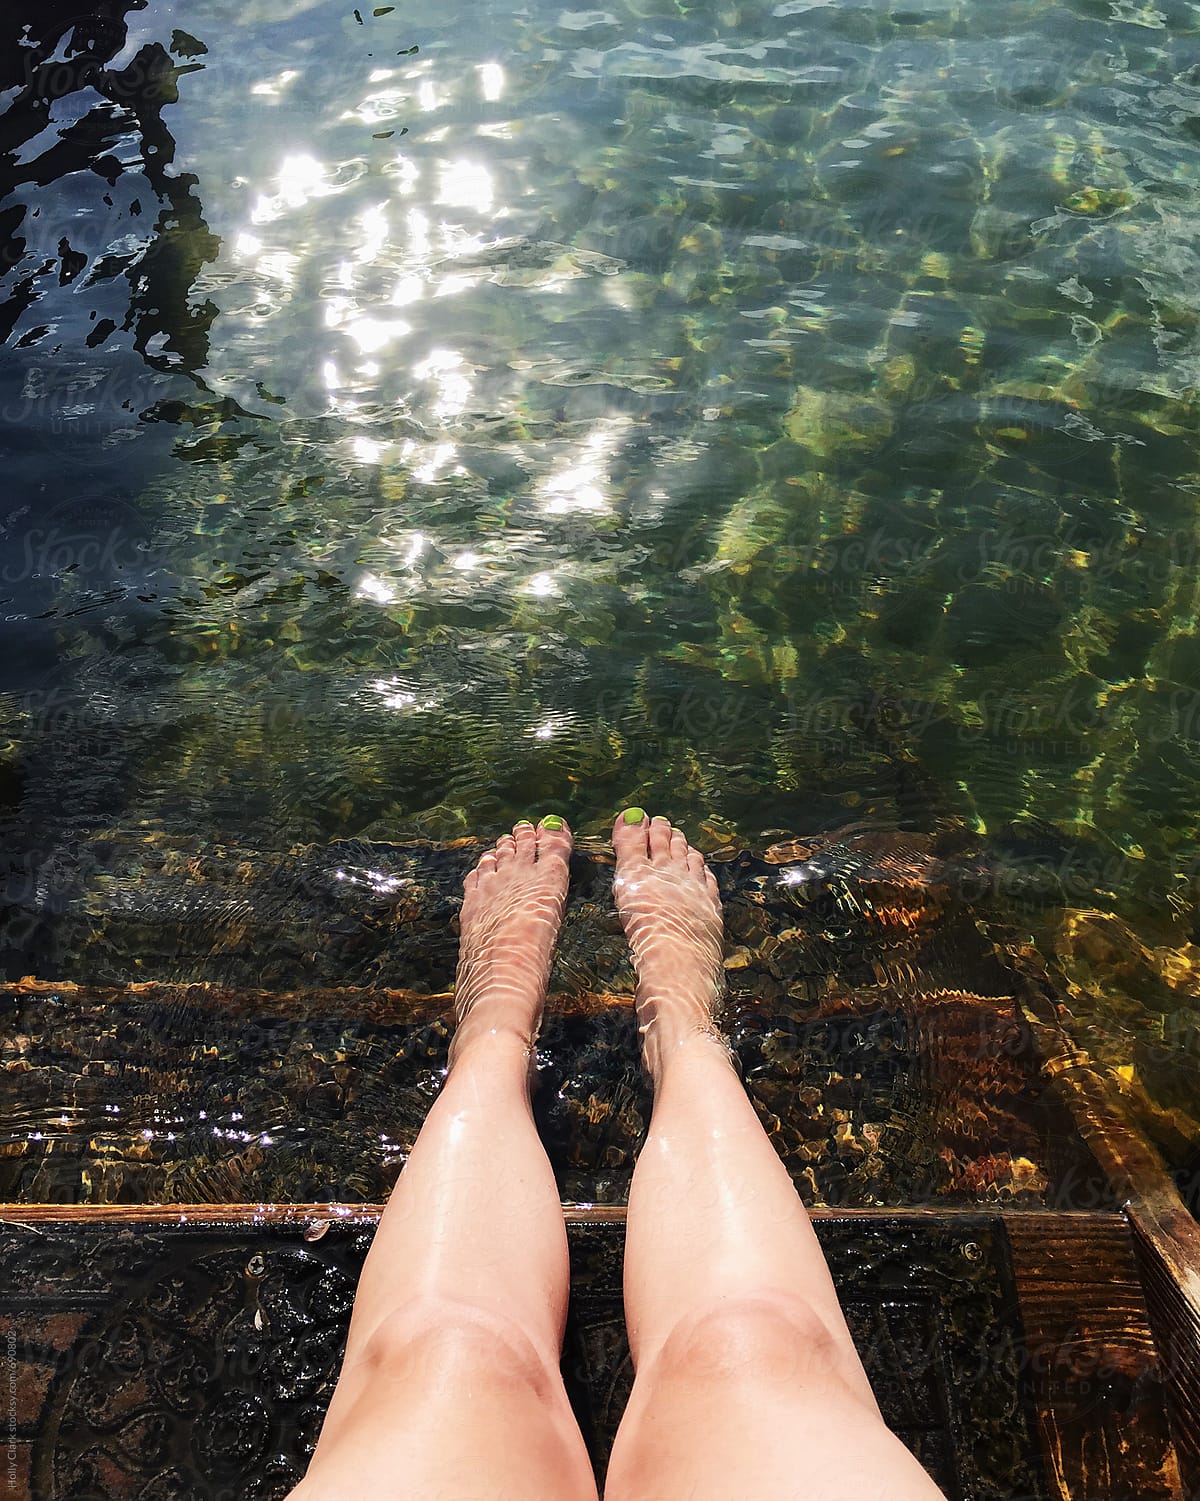 Female feet with green nail polish cooling off in lake